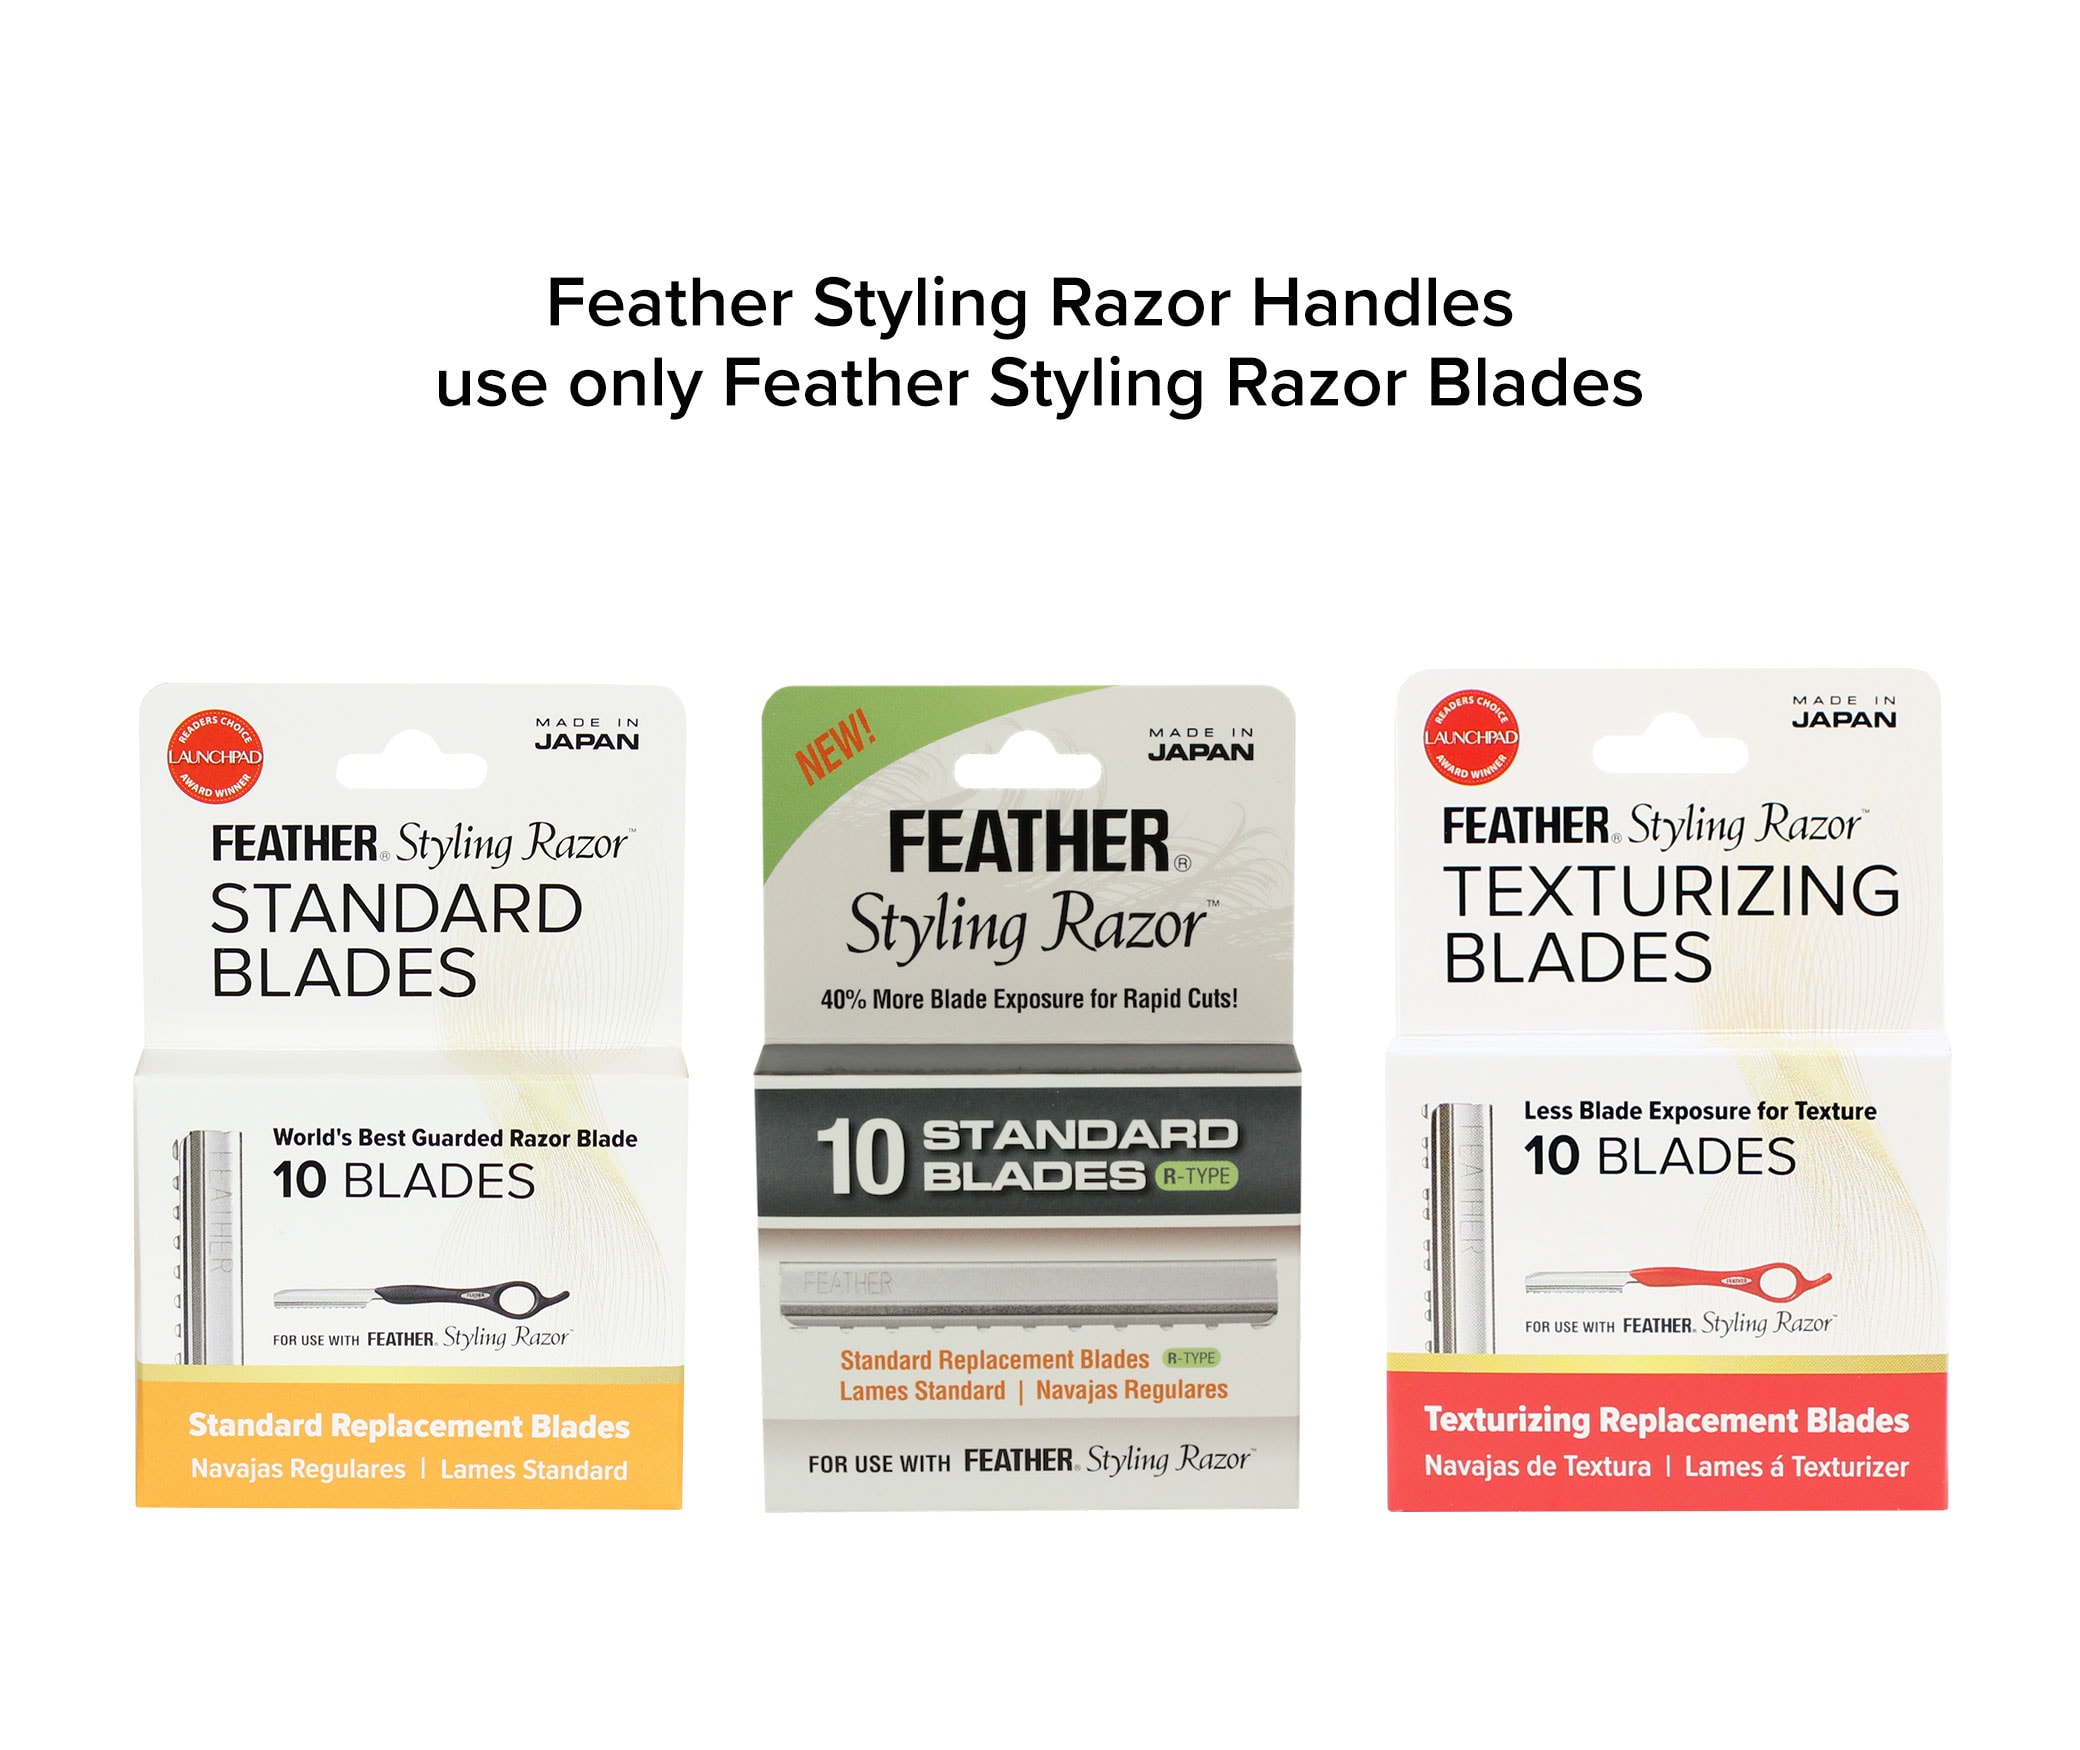 For use with Feather Styling Razor Blades